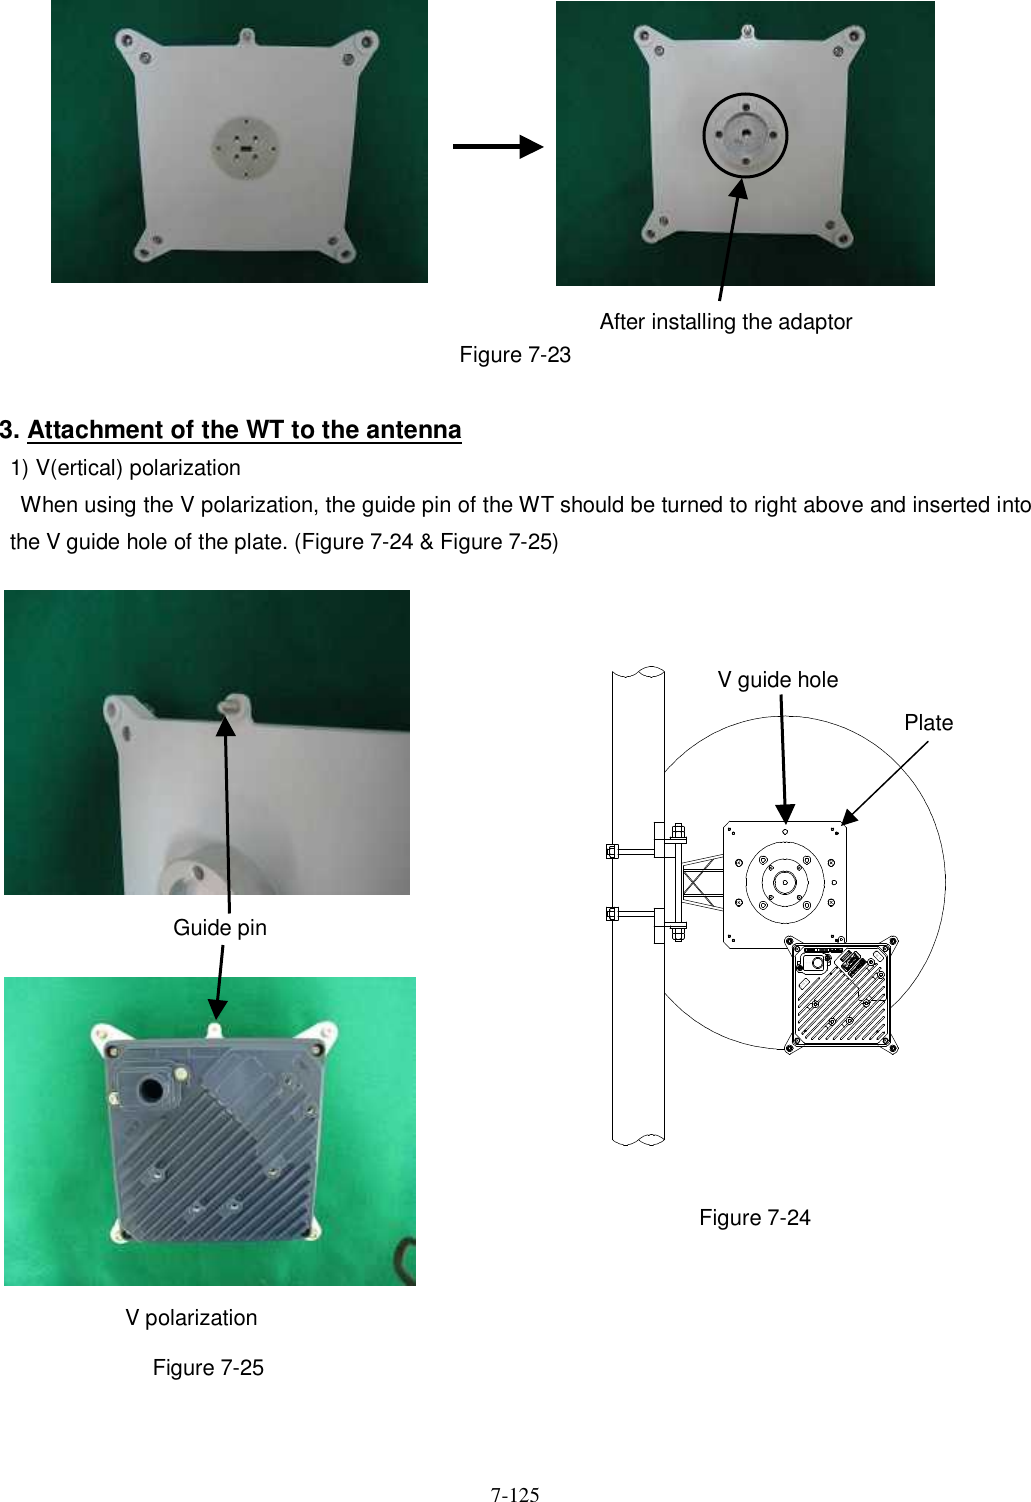   7-125            Figure 7-23  3. Attachment of the WT to the antenna 1) V(ertical) polarization     When using the V polarization, the guide pin of the WT should be turned to right above and inserted into the V guide hole of the plate. (Figure 7-24 &amp; Figure 7-25)                                  Figure 7-24           Figure 7-25   V polarization Guide pin After installing the adaptor V guide hole Plate ＴＯＰＶＴＯＰ ＨＥＴＨＥＲ